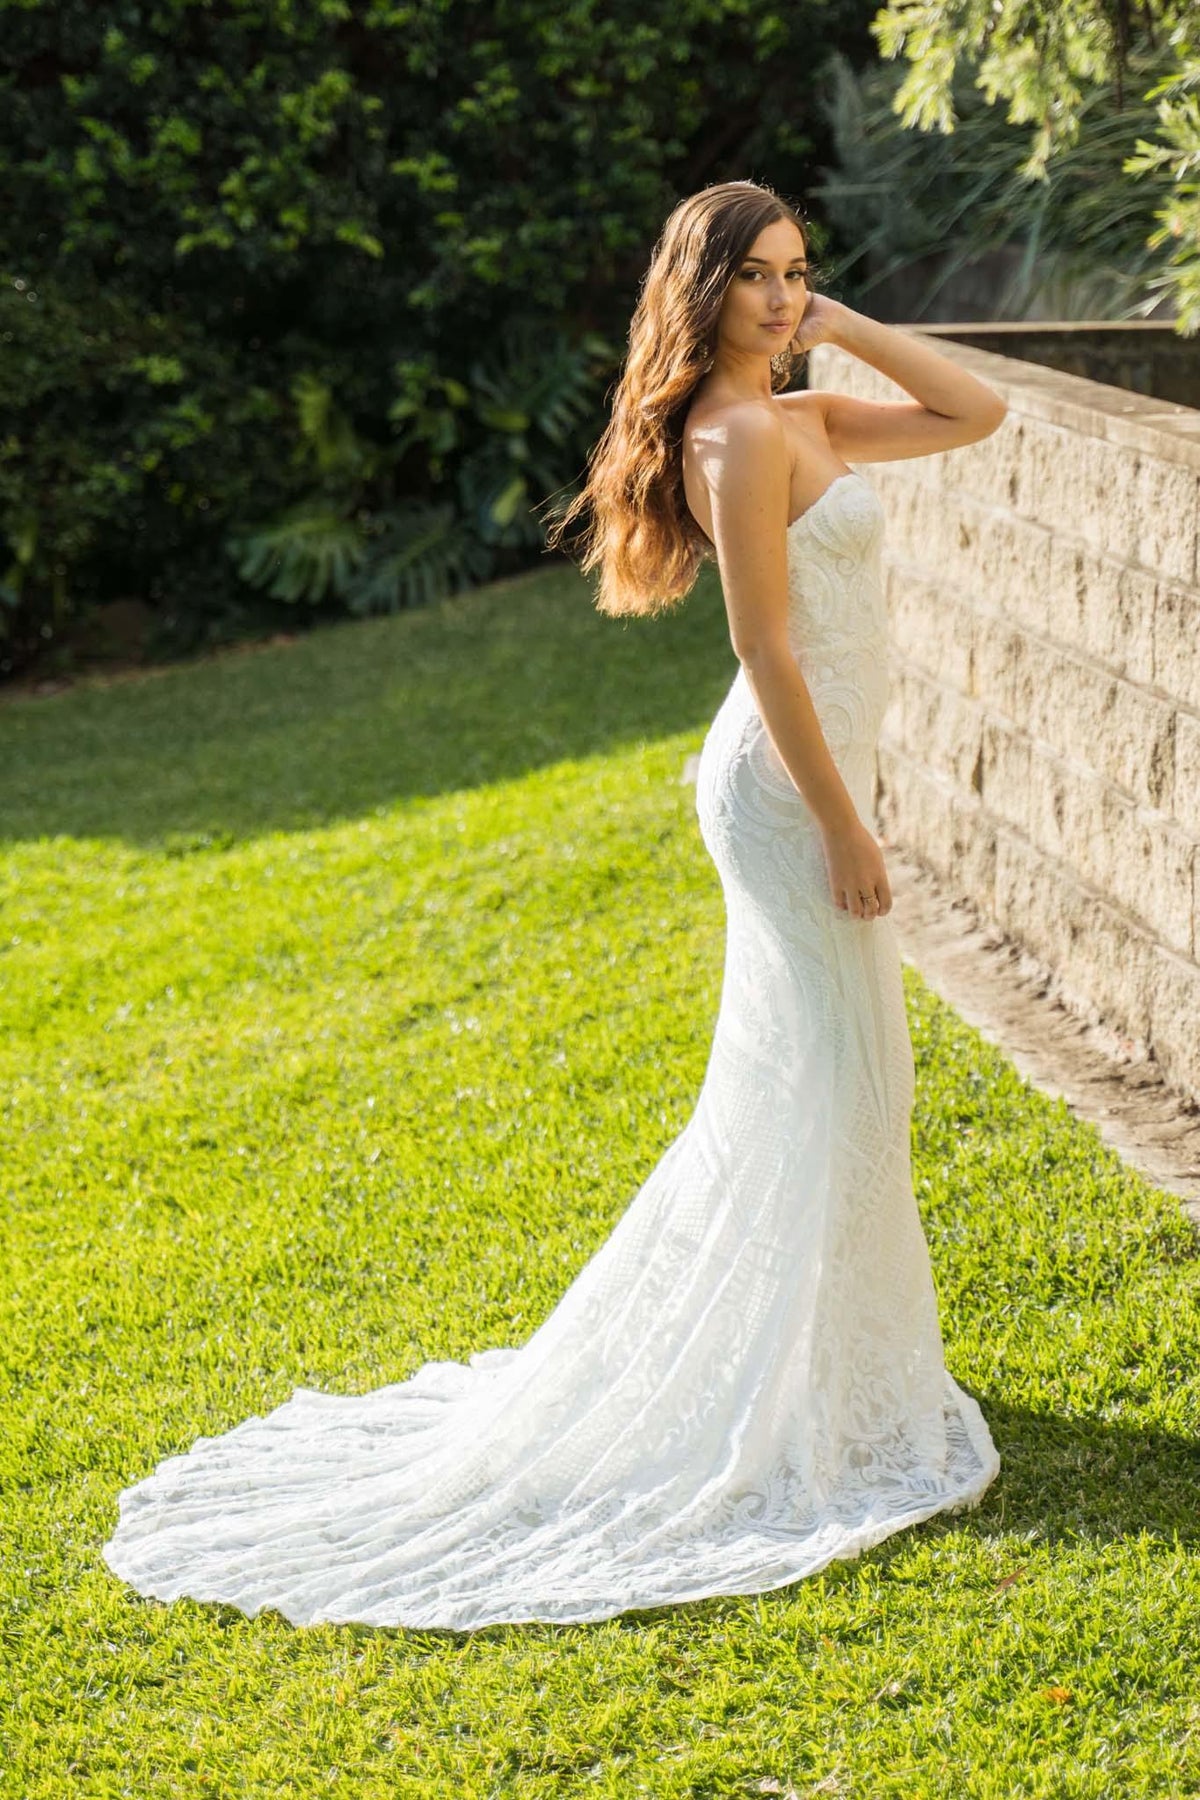 White Embroidered Pattern Sequin Floor Length Evening Dress with Strapless Sweetheart Neckline and Mermaid Skirt